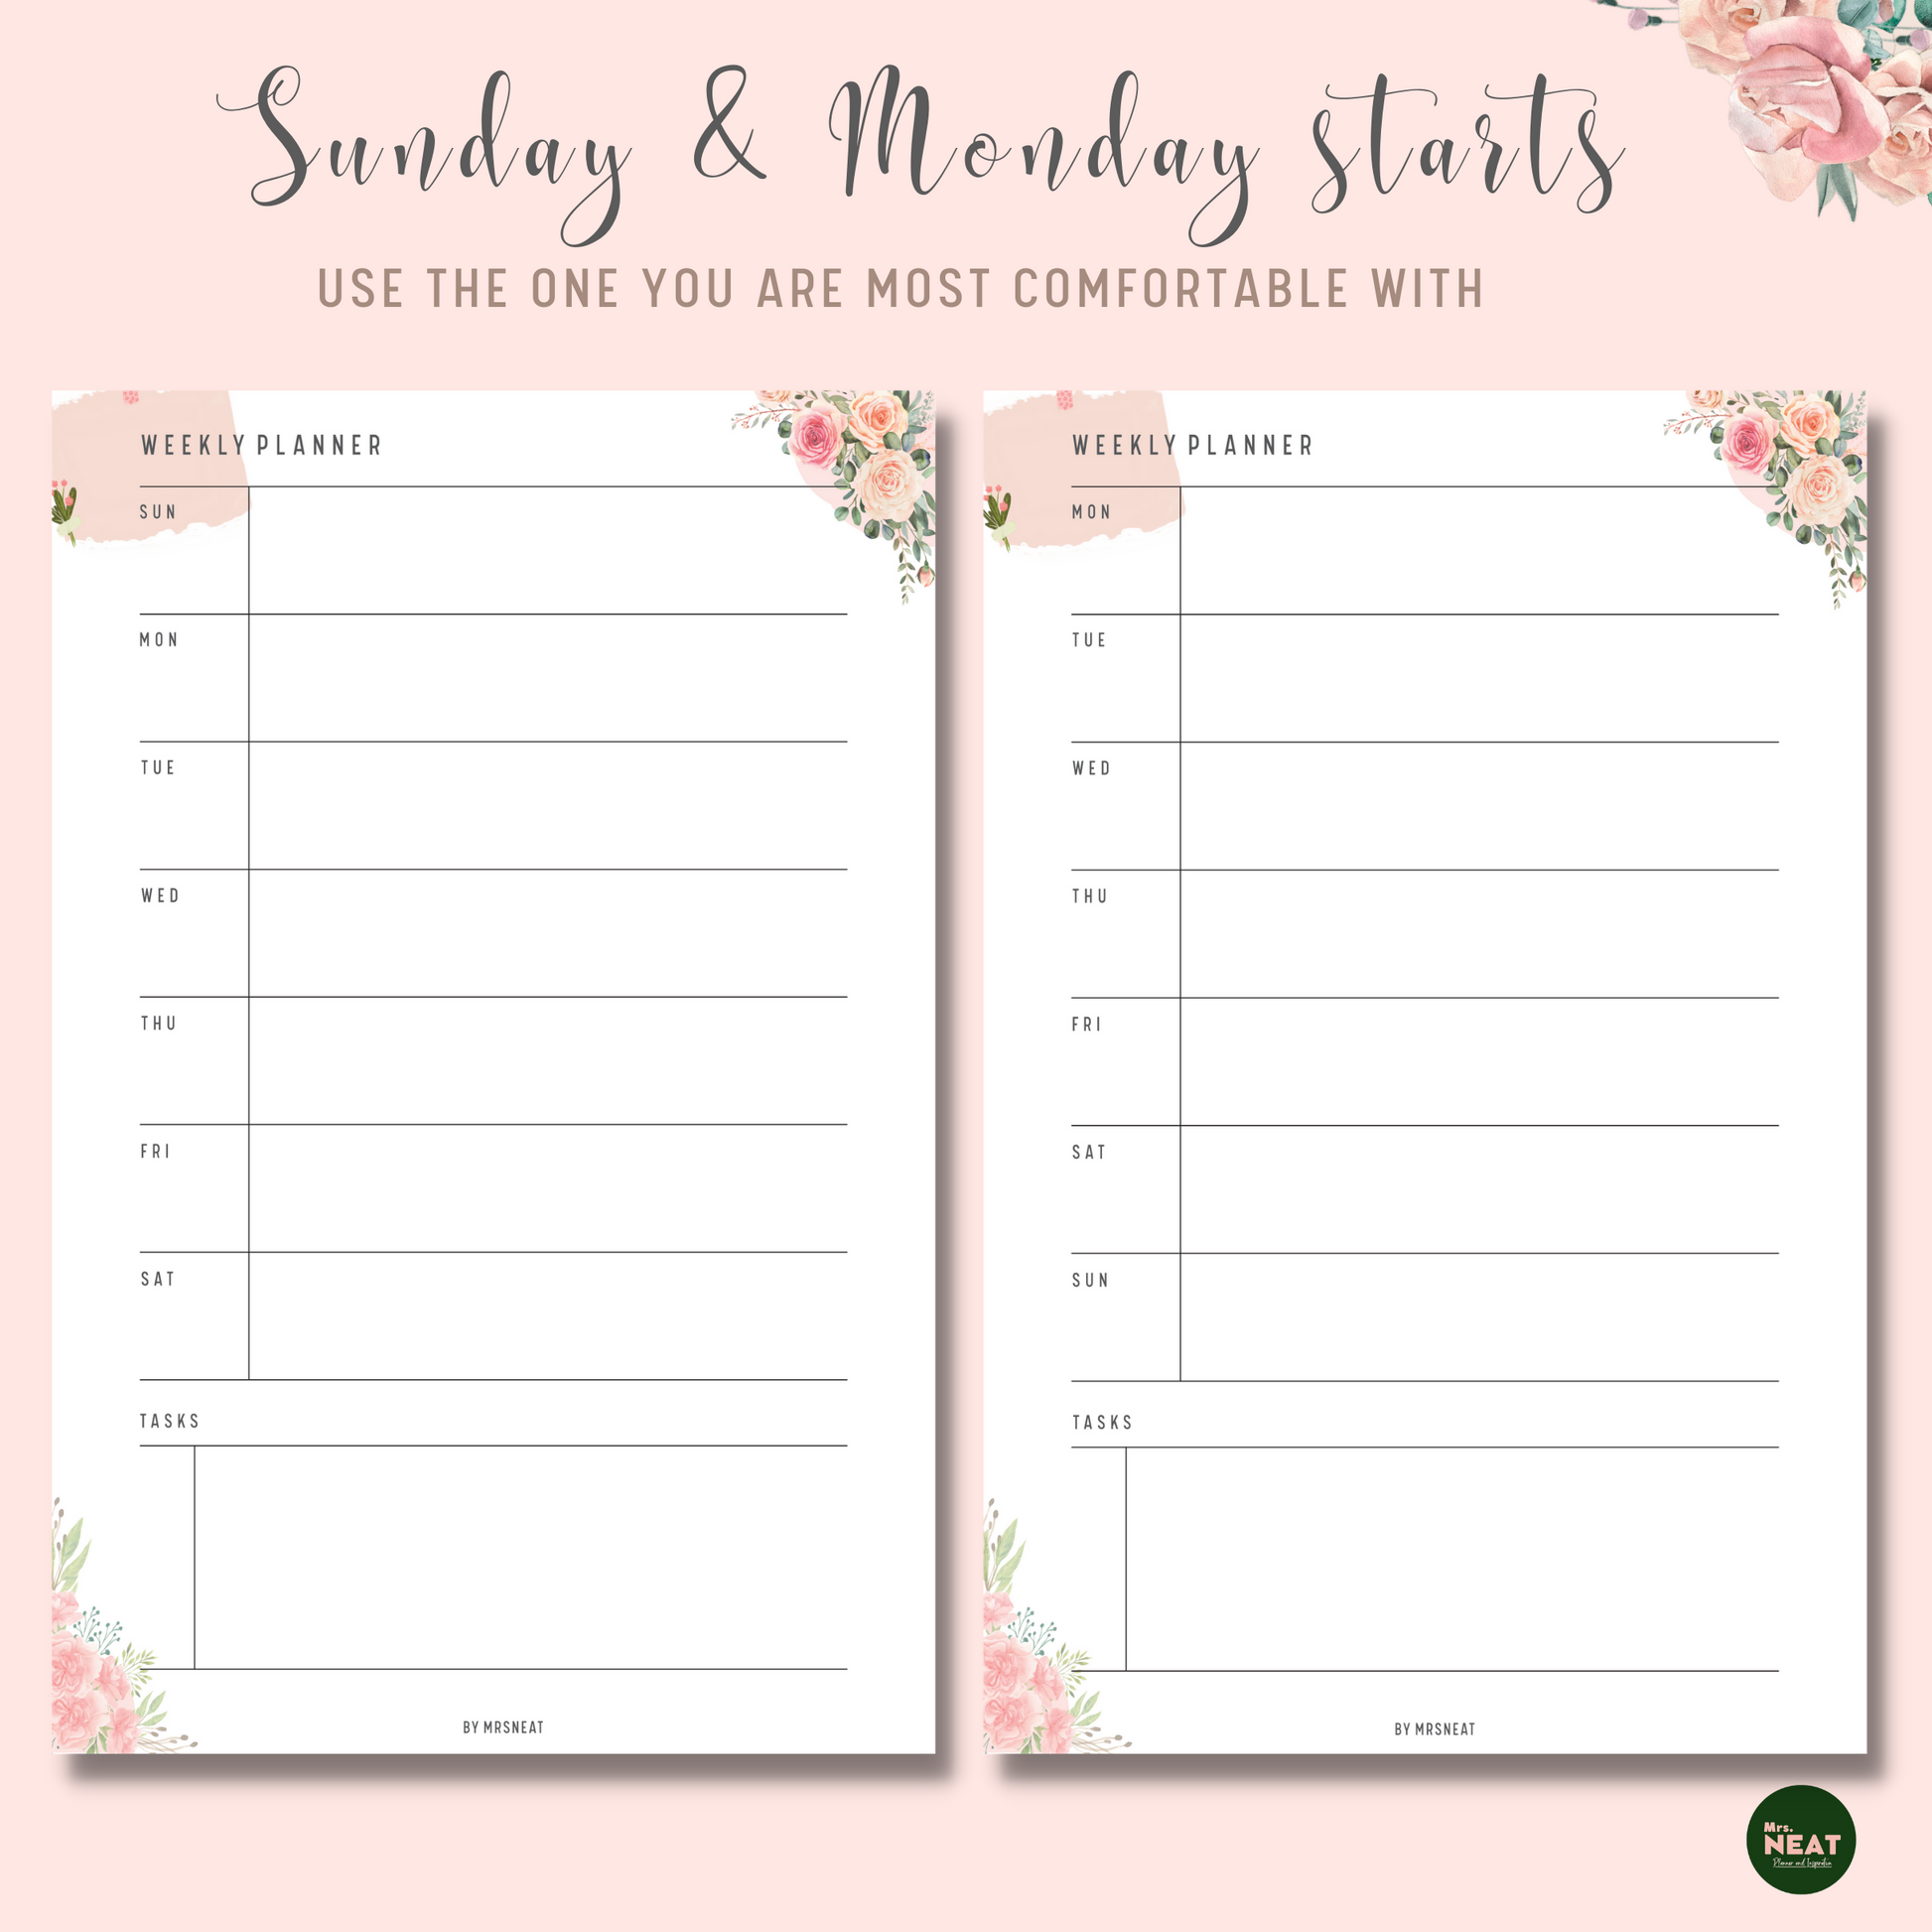 Cute Pink Floral Weekly Planner with Sunday Start and Monday Start page